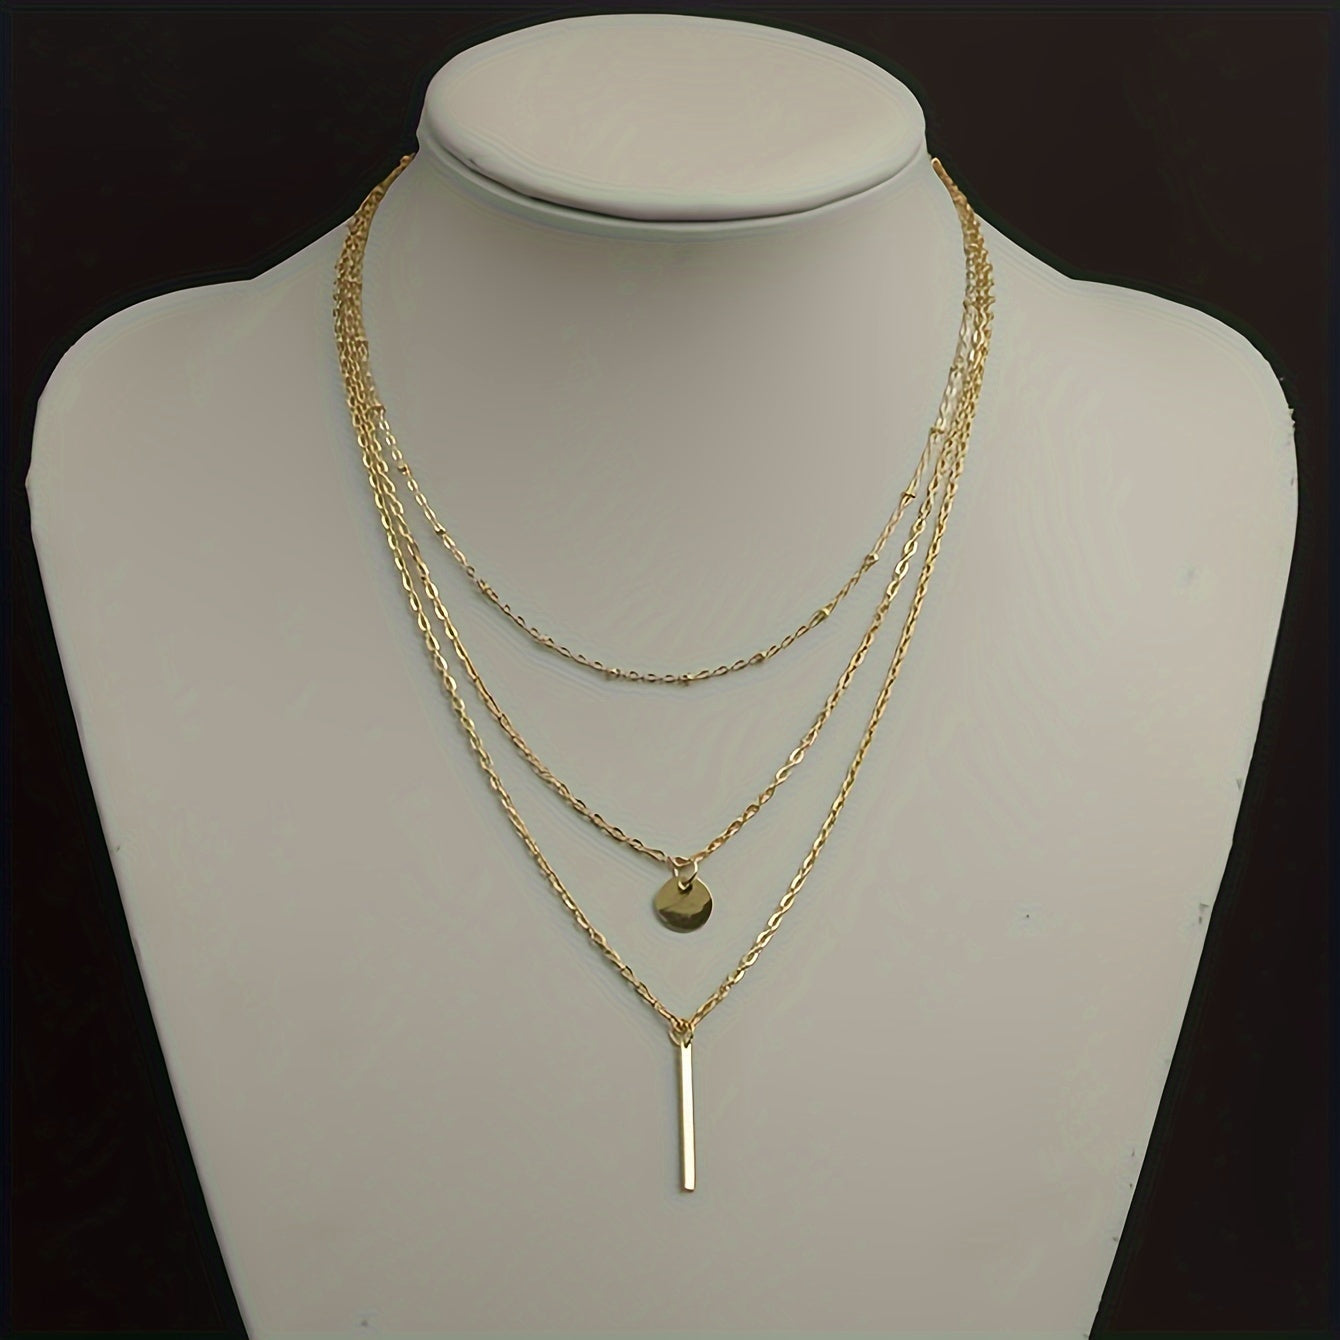 Luxurious multi-layer necklace